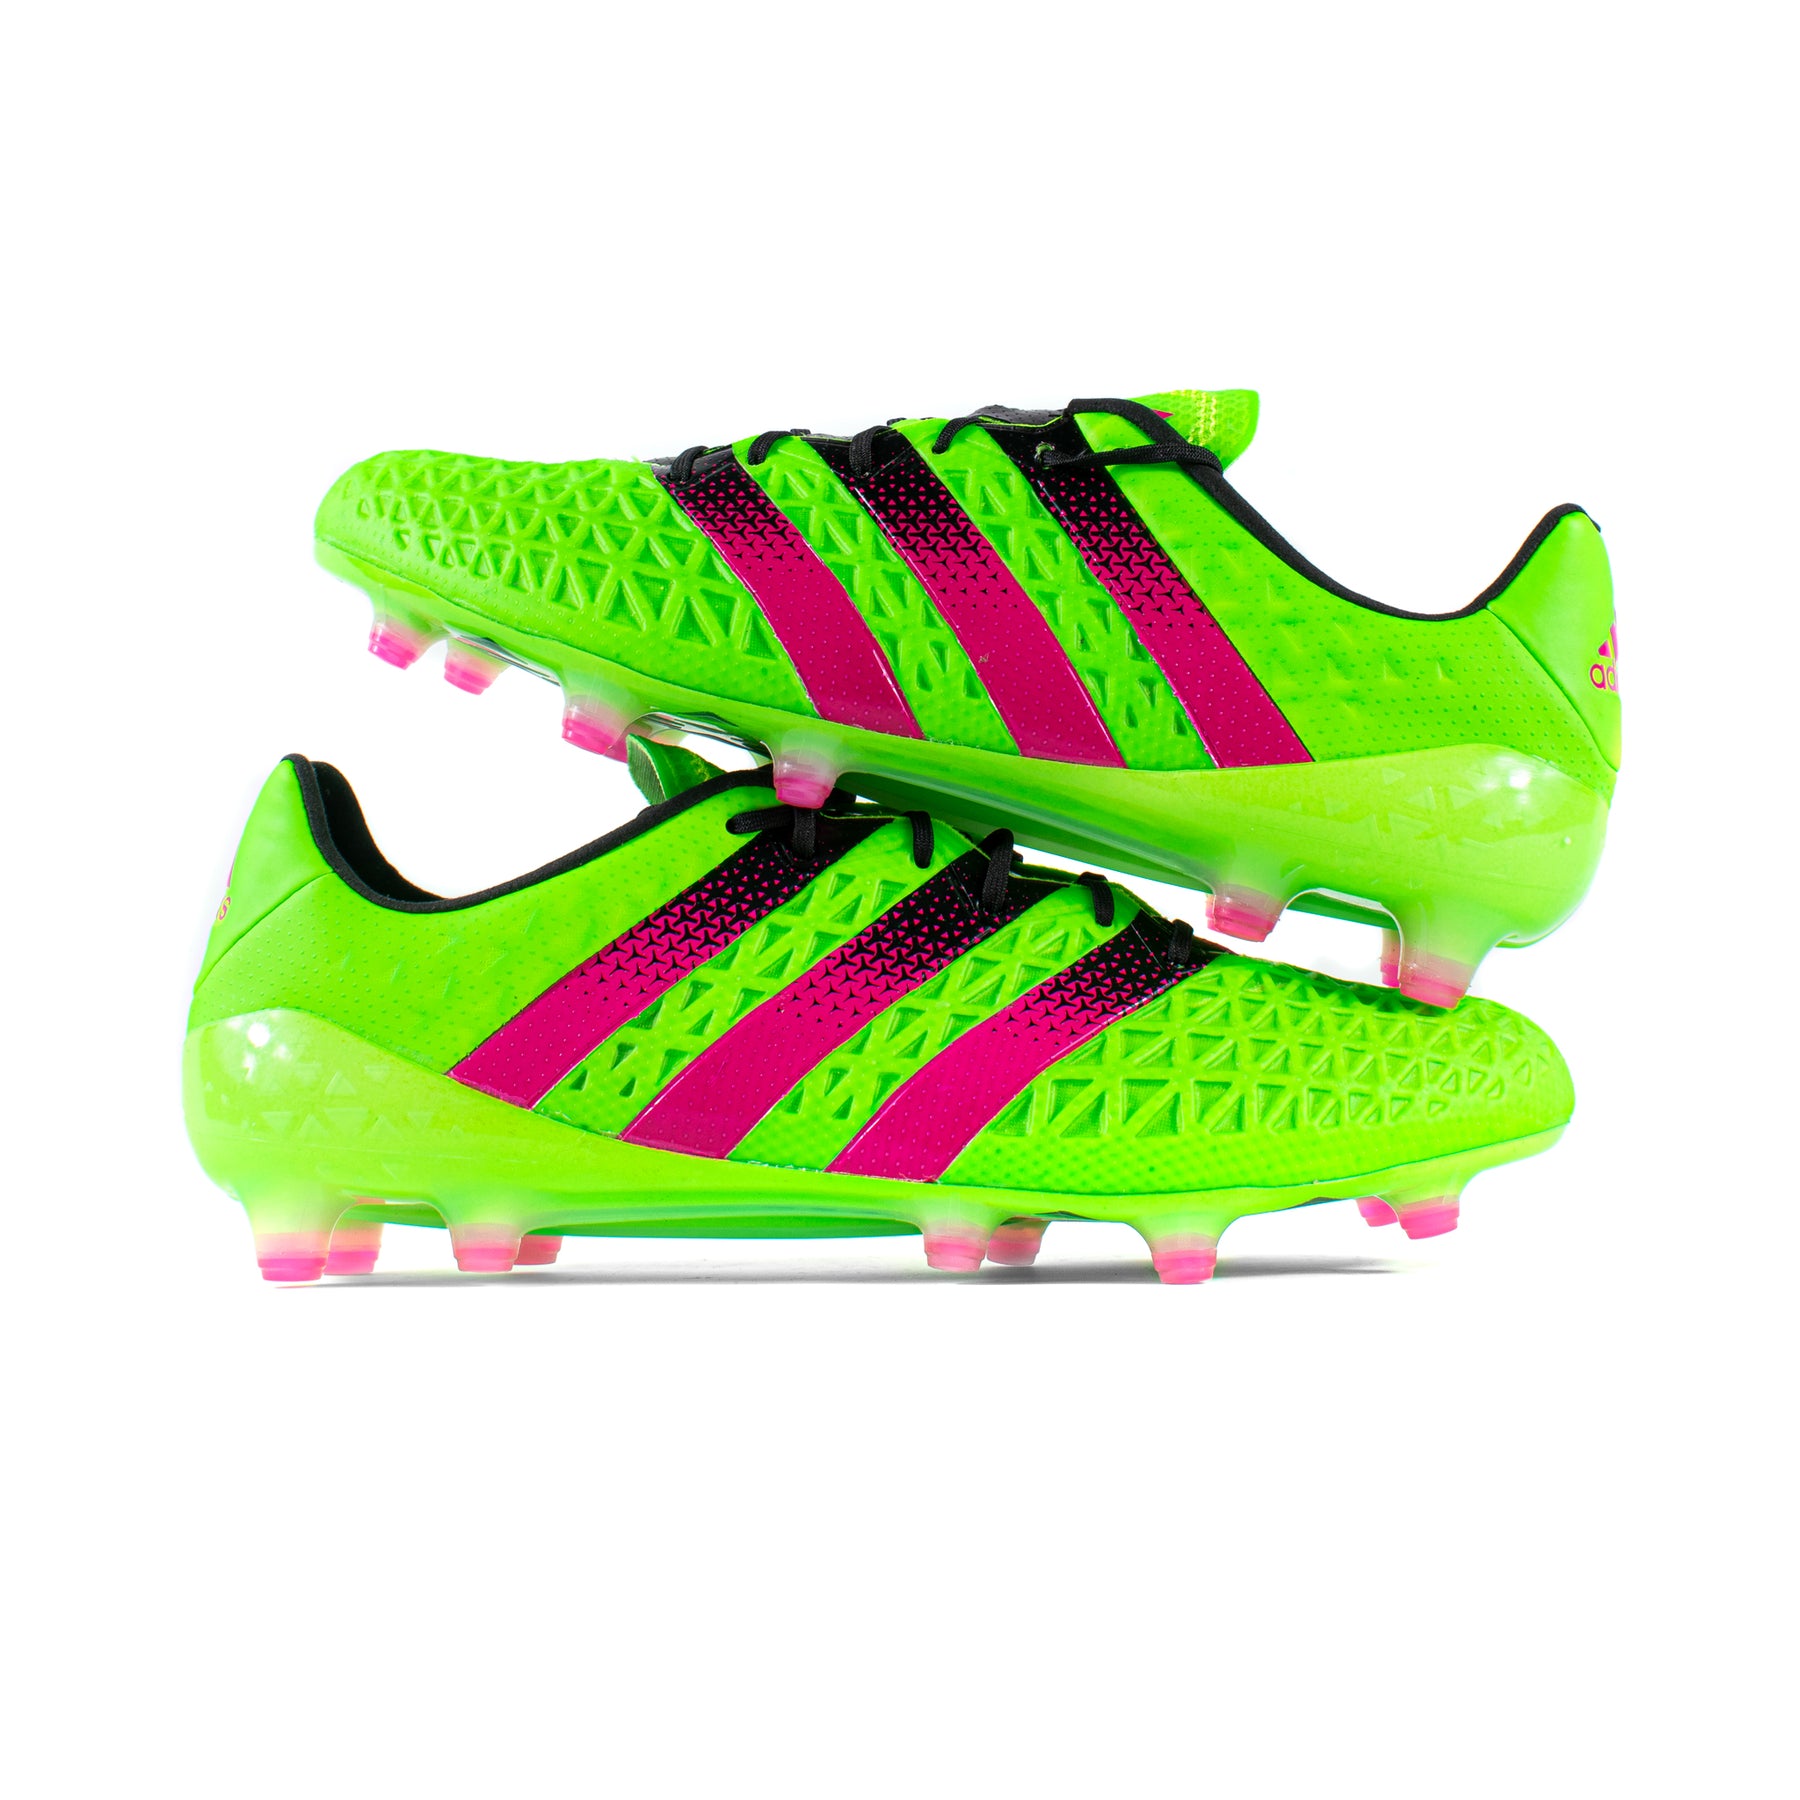 Adidas Ace 16.1 Green – Classic Soccer